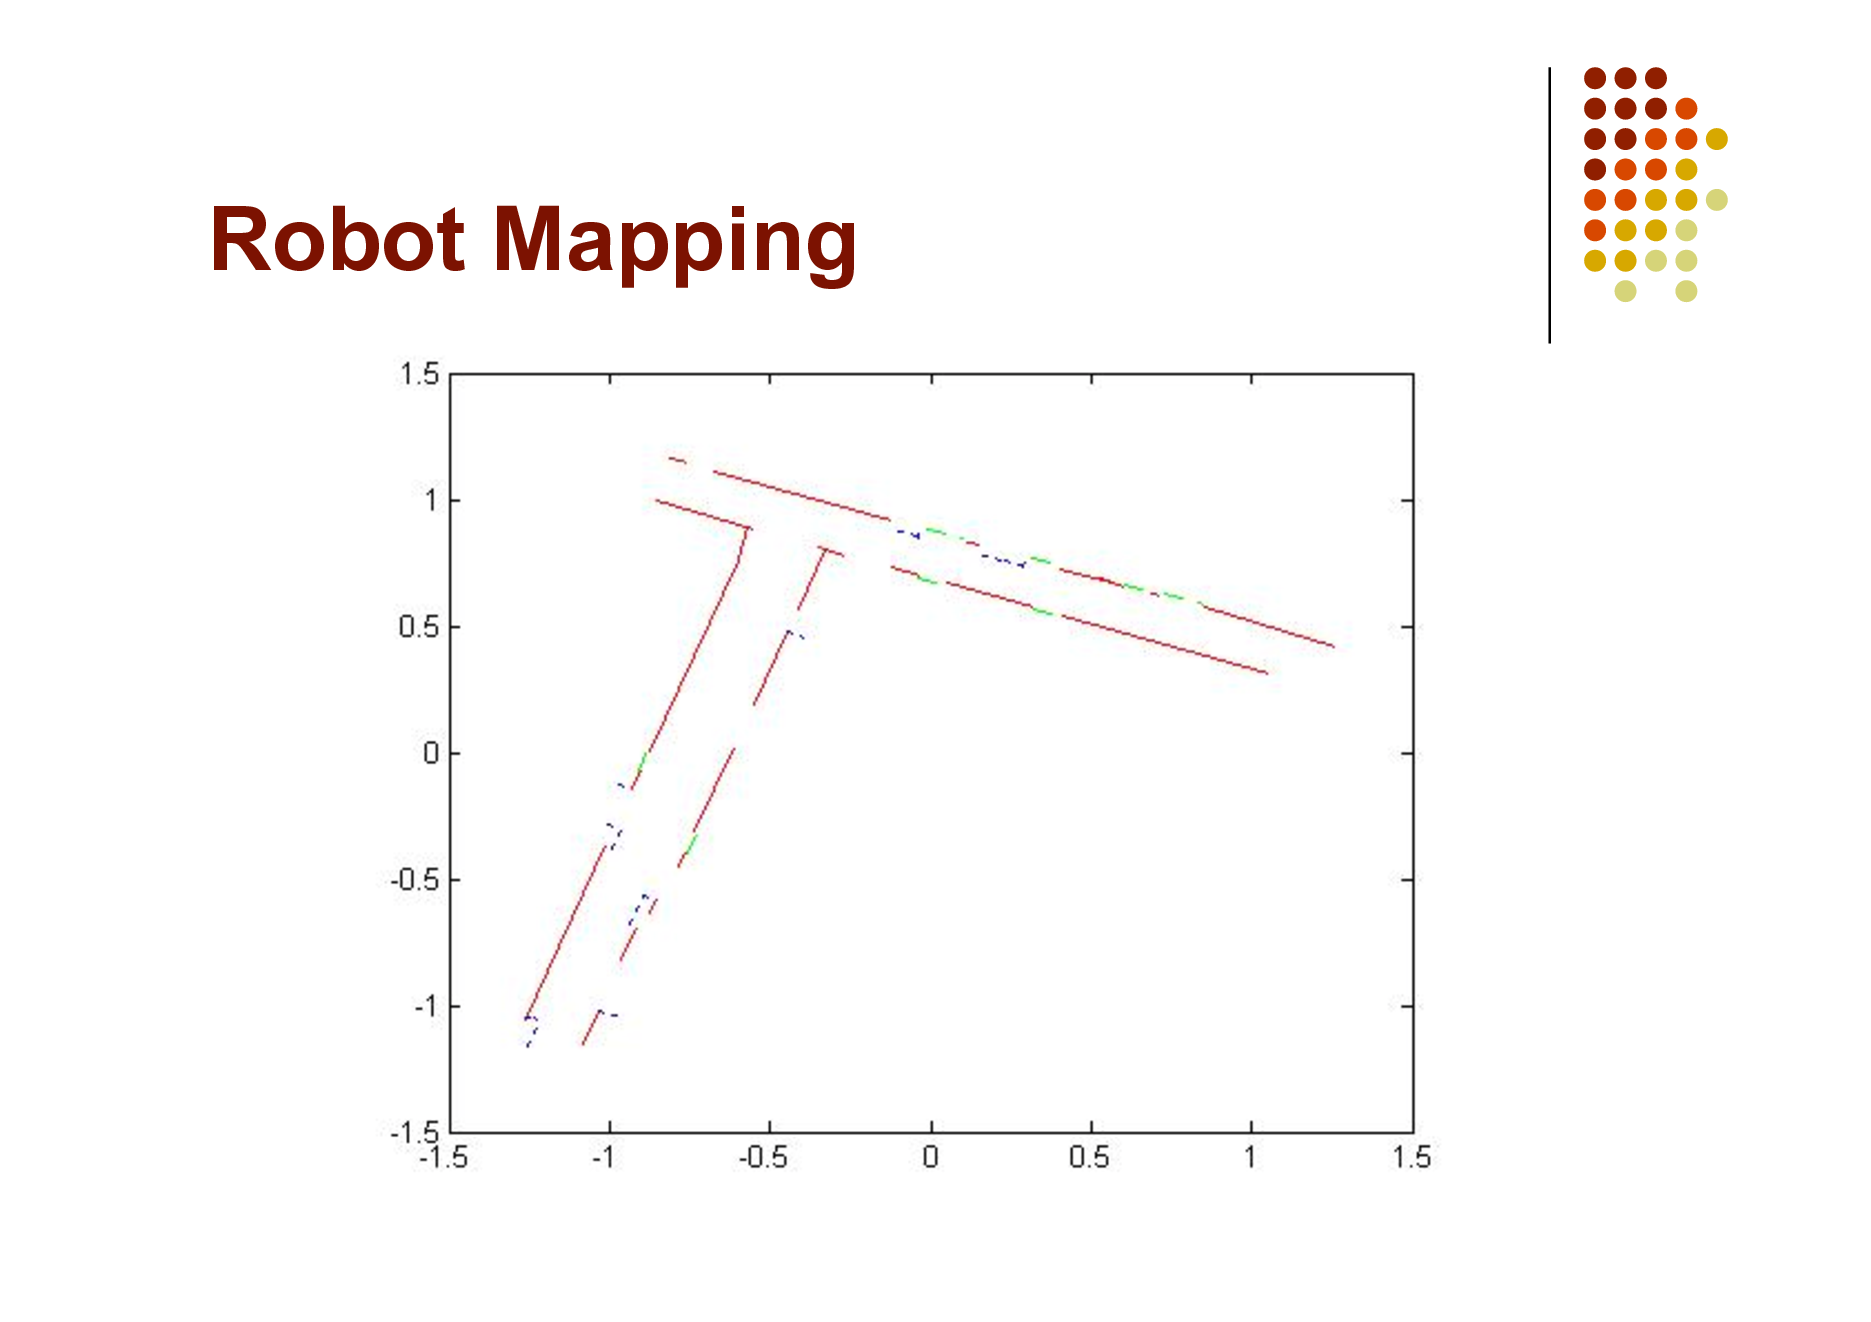 Slide: Robot Mapping

